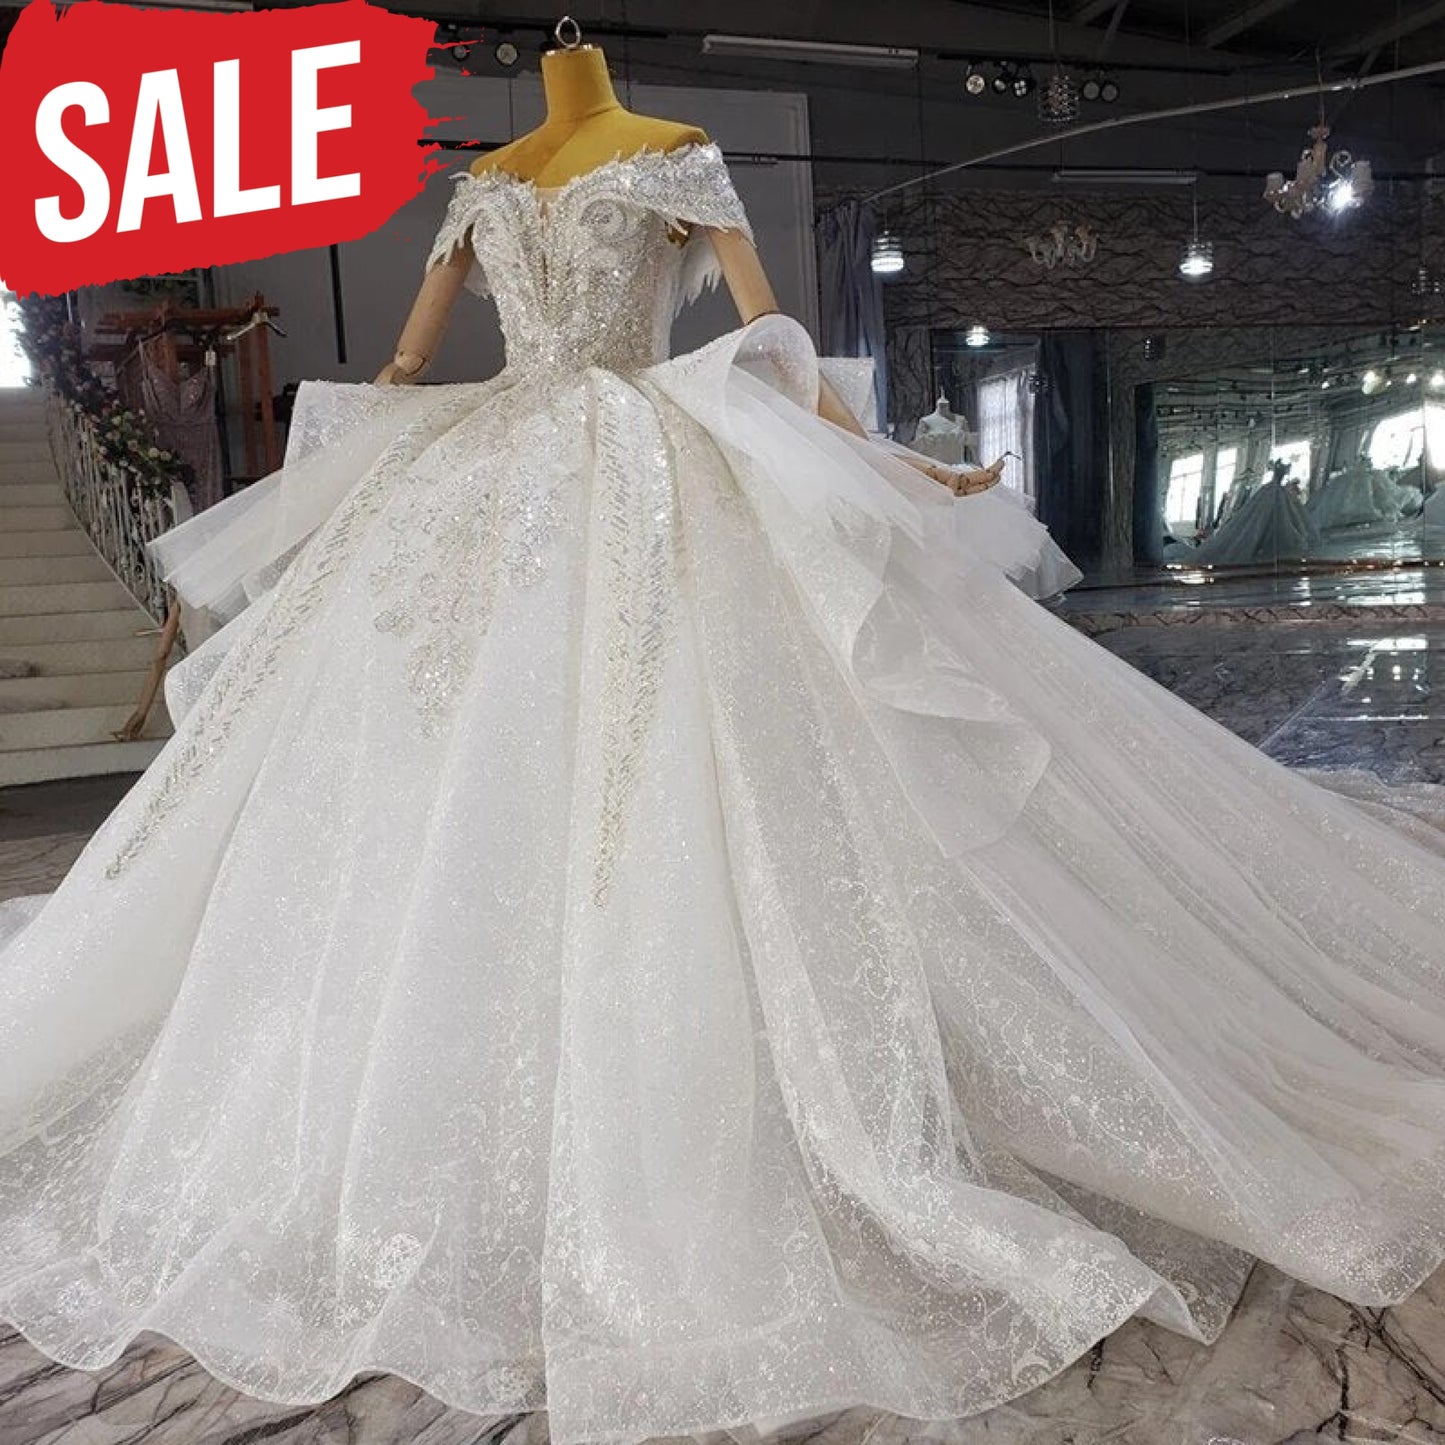 Simple Luxurious White Gowns Luxurious Medieval White Wedding Gowns bLuxurious Medieval White Wedding Gown Luxurious Medieval White Wedding Gowns Luxurious Medieval White Wedding Gowns Luxurious Medieval White Wedding Gowns Luxurious Medieval White Wedding GownsLuxurious Medieval White Wedding Gowns